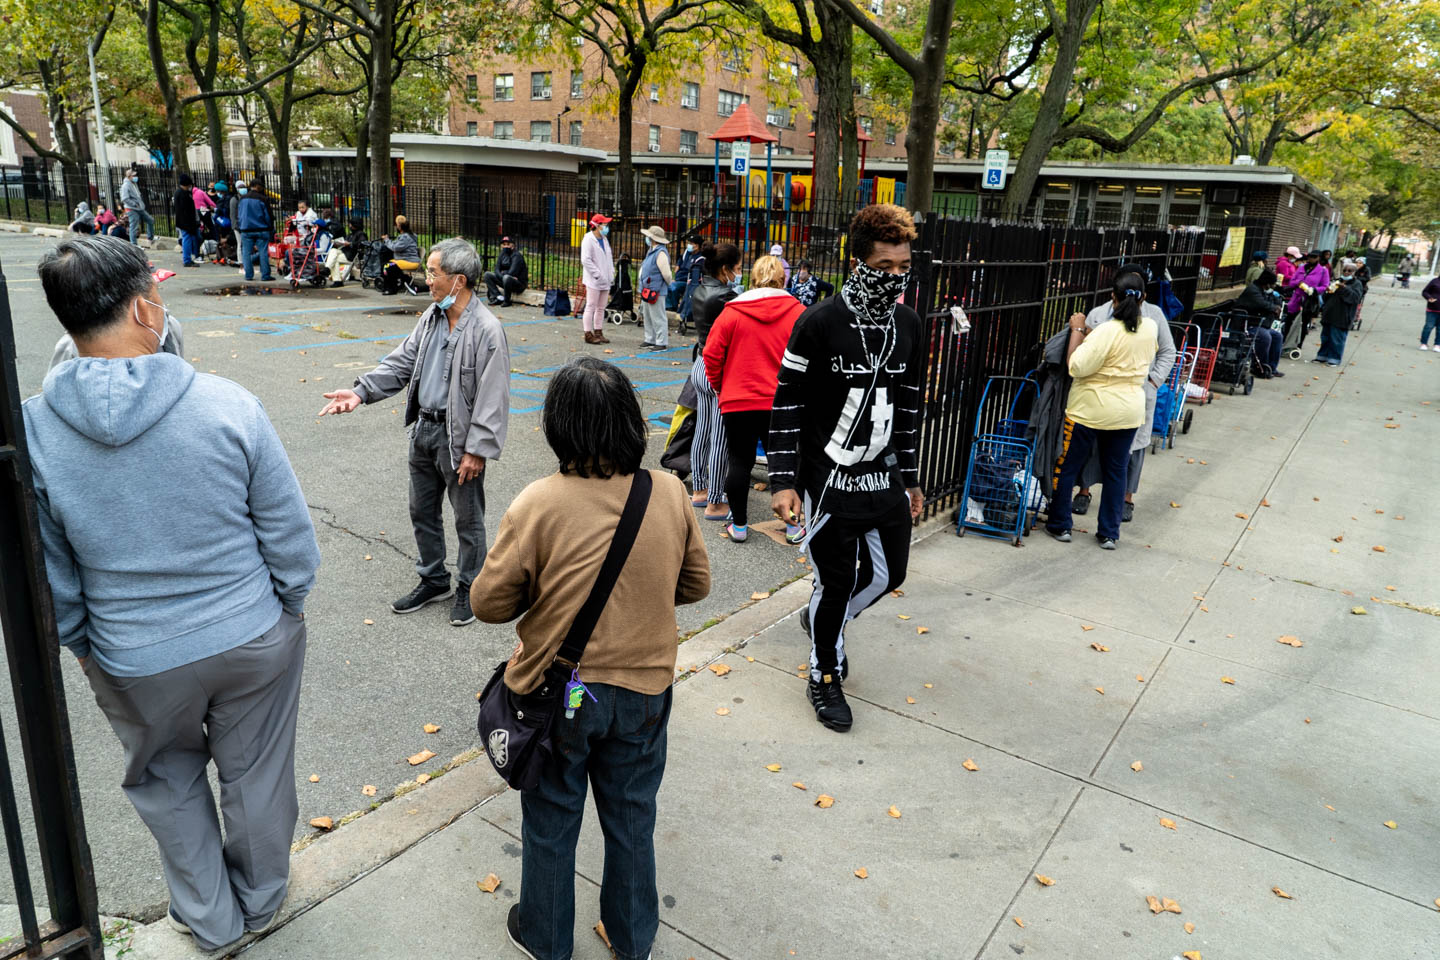 October 21, 2020: Waiting for the 4:00 pm food truck. Public housing parking lot, Powell Street at Sutter Avenue, Brooklyn, New York. © Camilo José Vergara